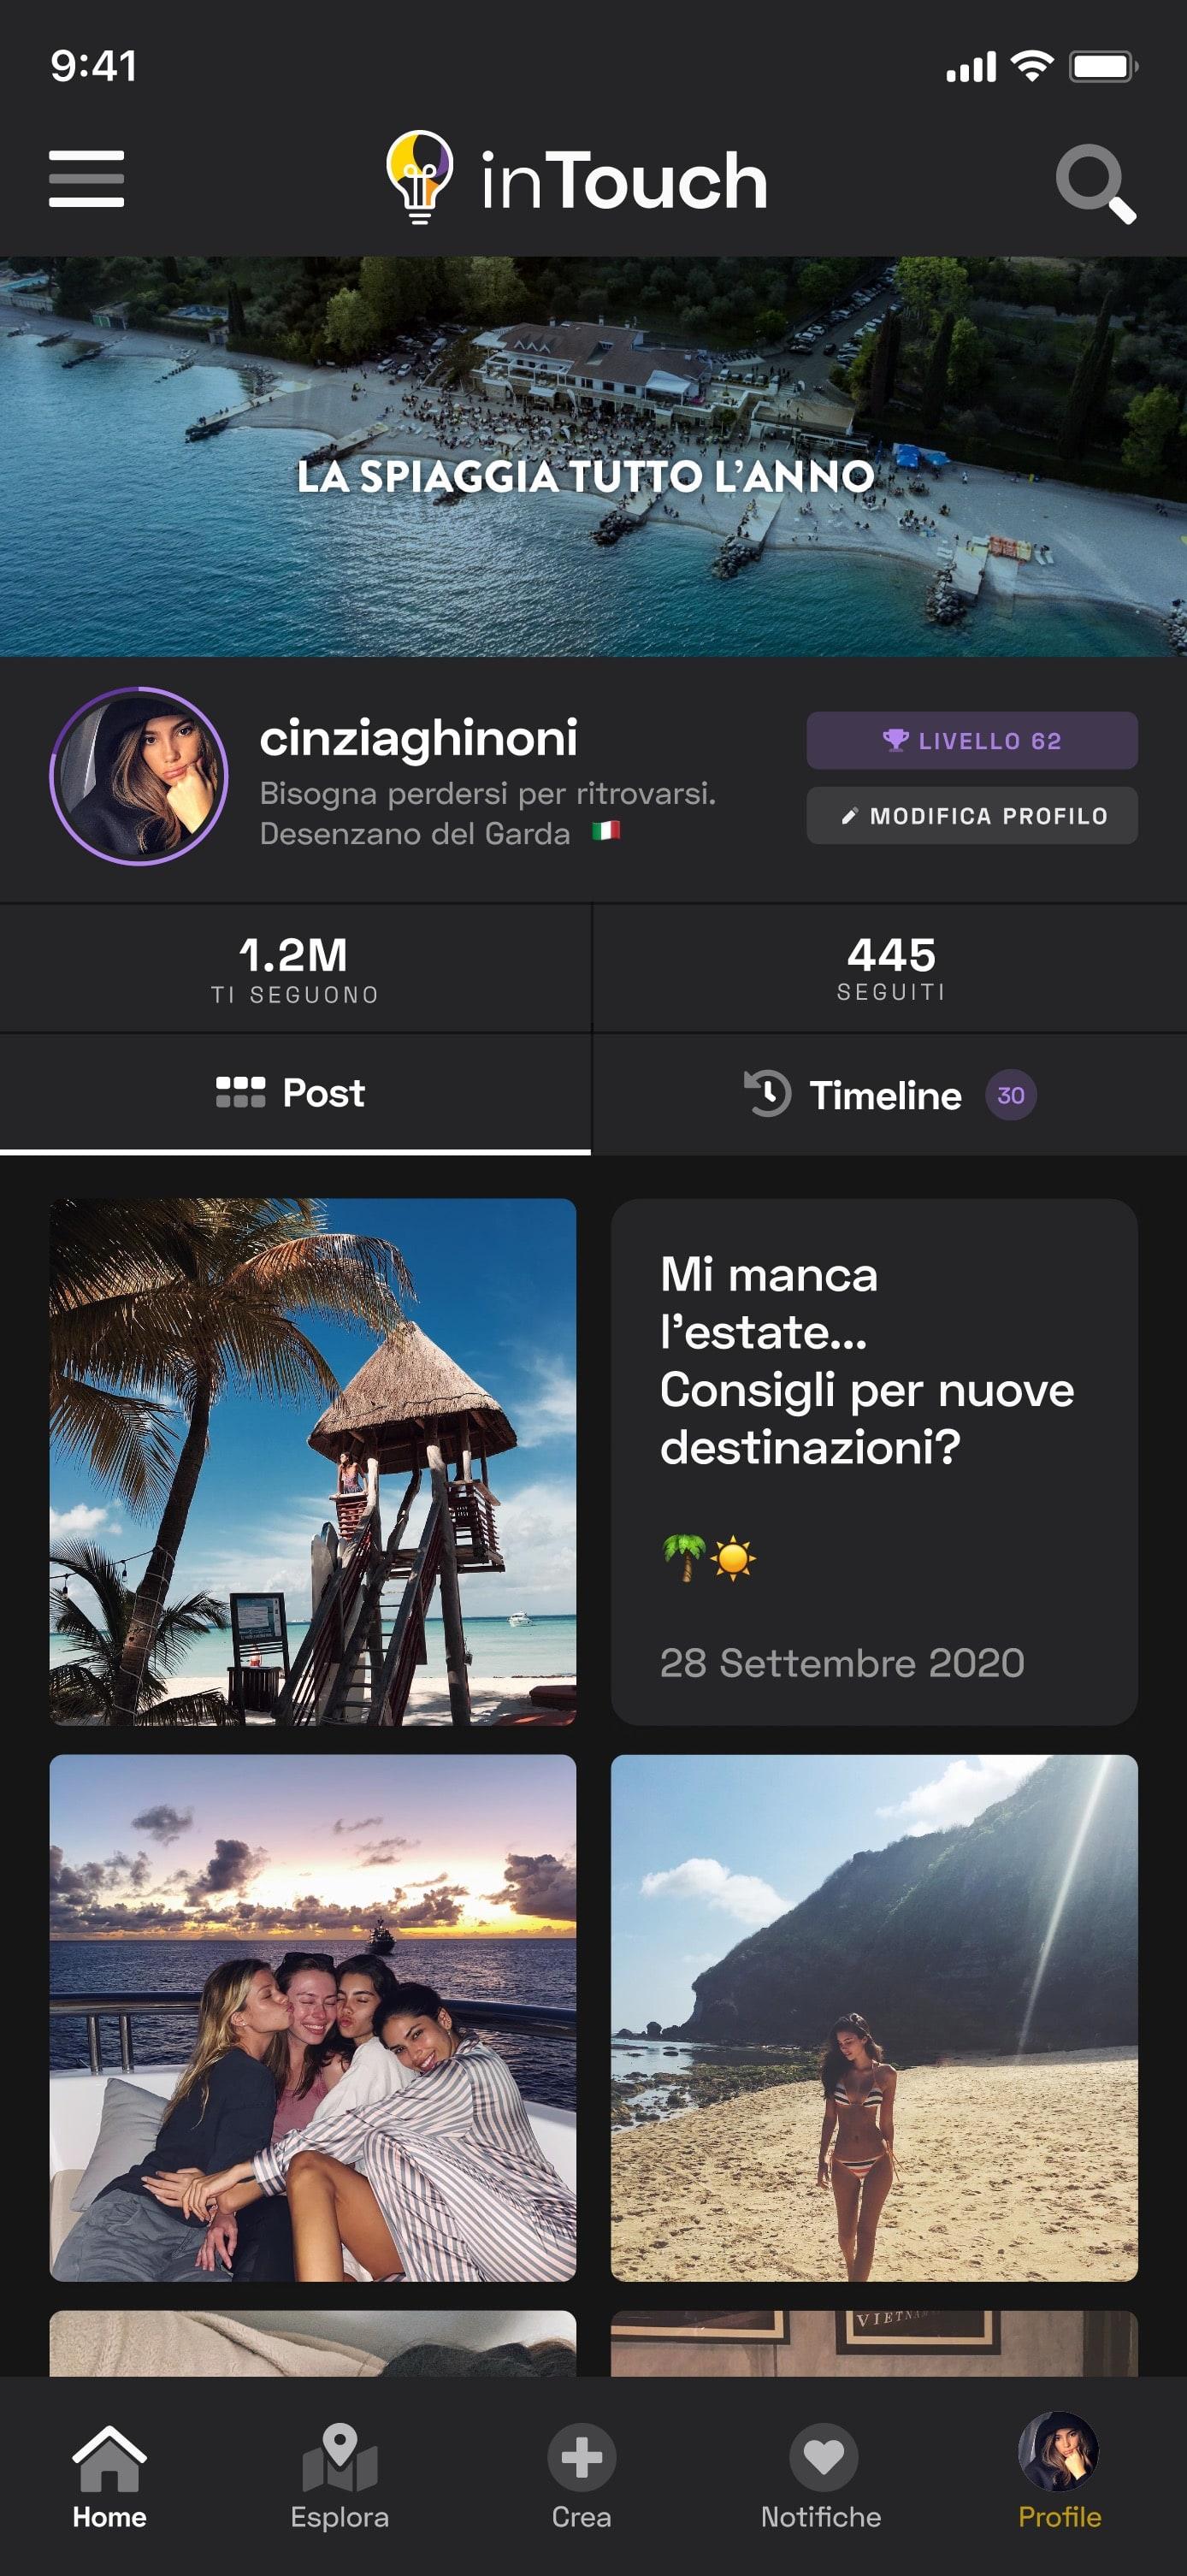 InTouch App UI - Profile Posts